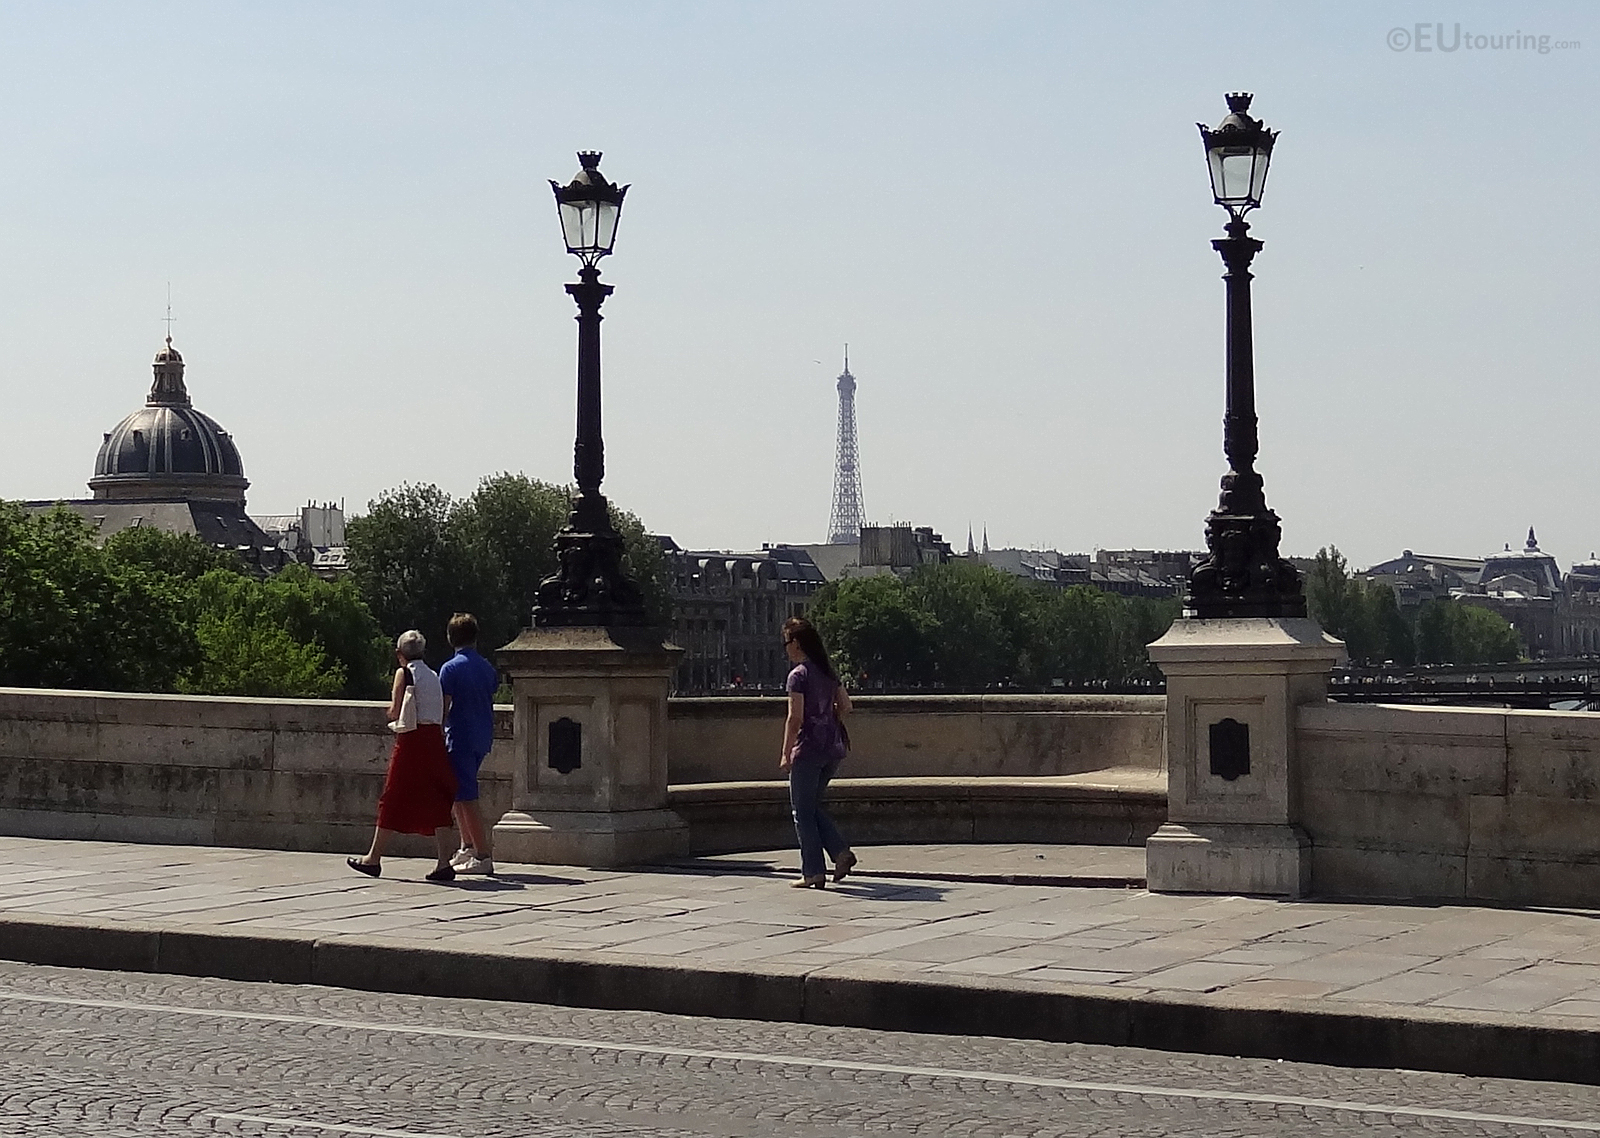 From the Pont Neuf to the Eiffel Tower